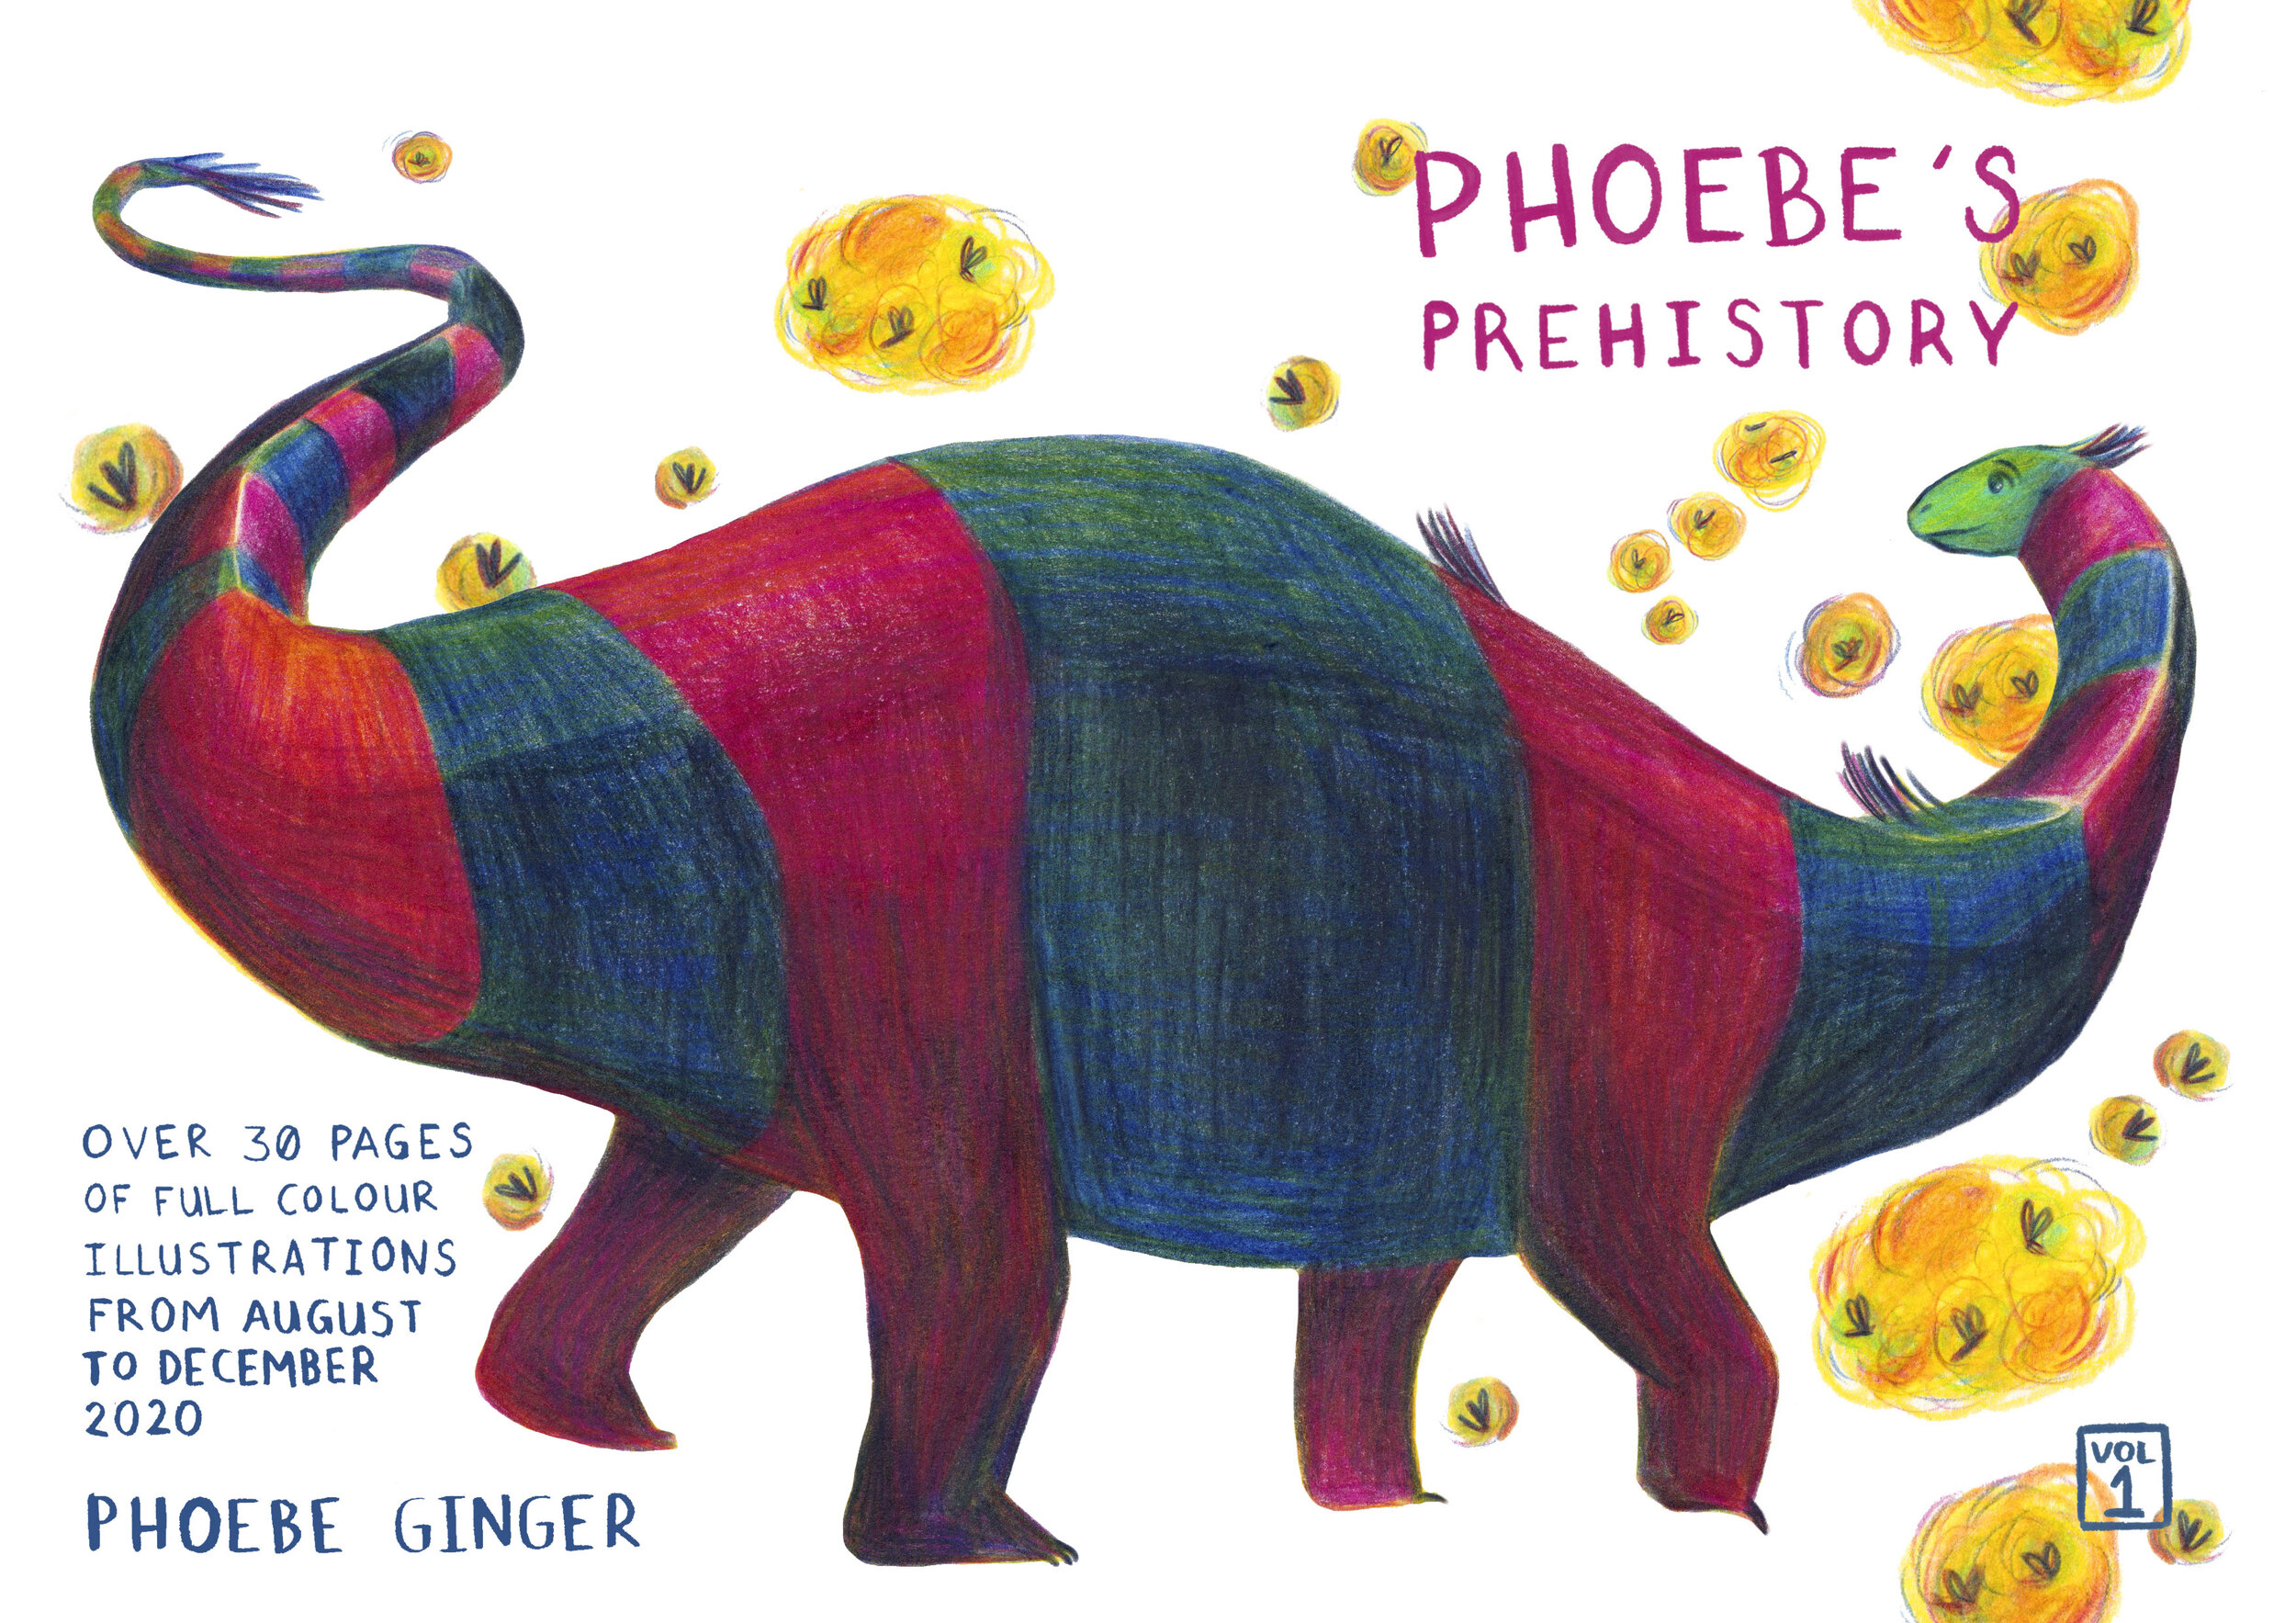 Phoebe's Prehistory Volume 1 - front and back cover